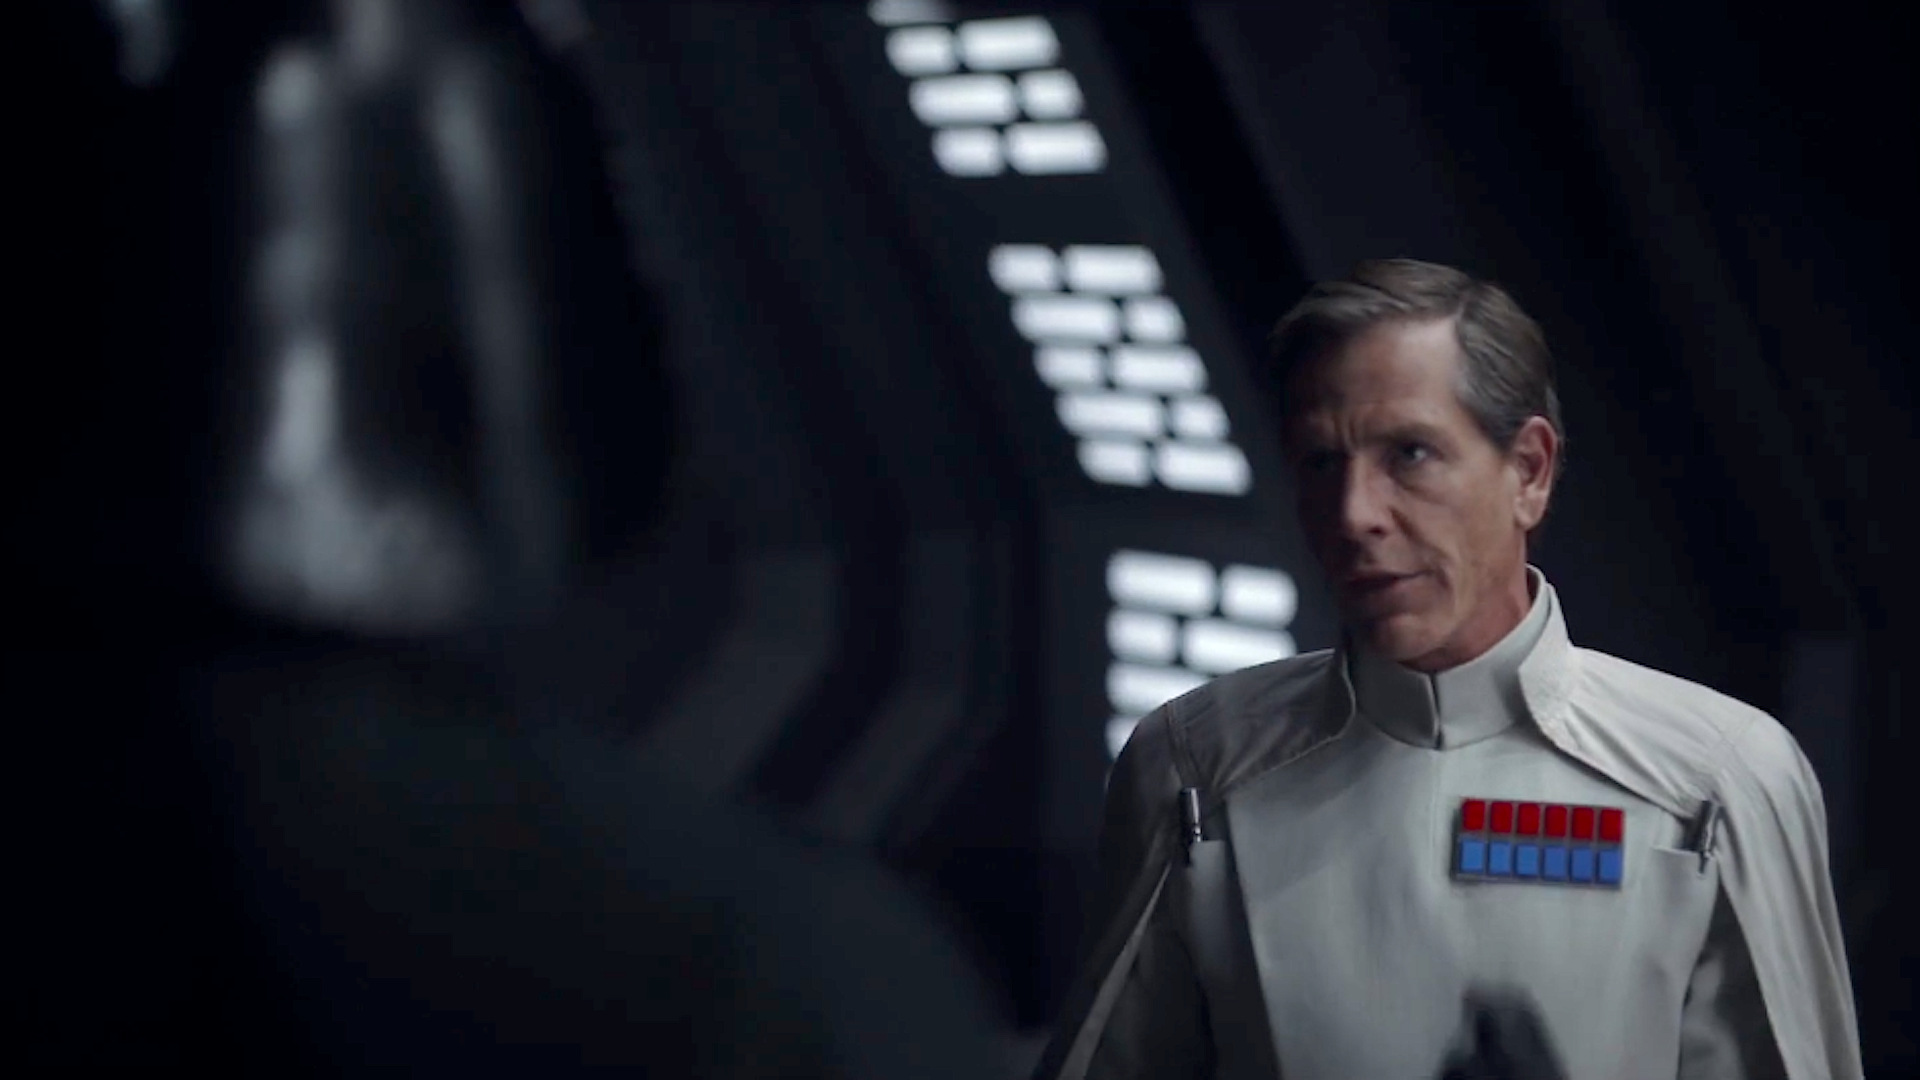 Details on the Scene Between Darth Vader and Orson Krennic from Rogue One! Wars News Net